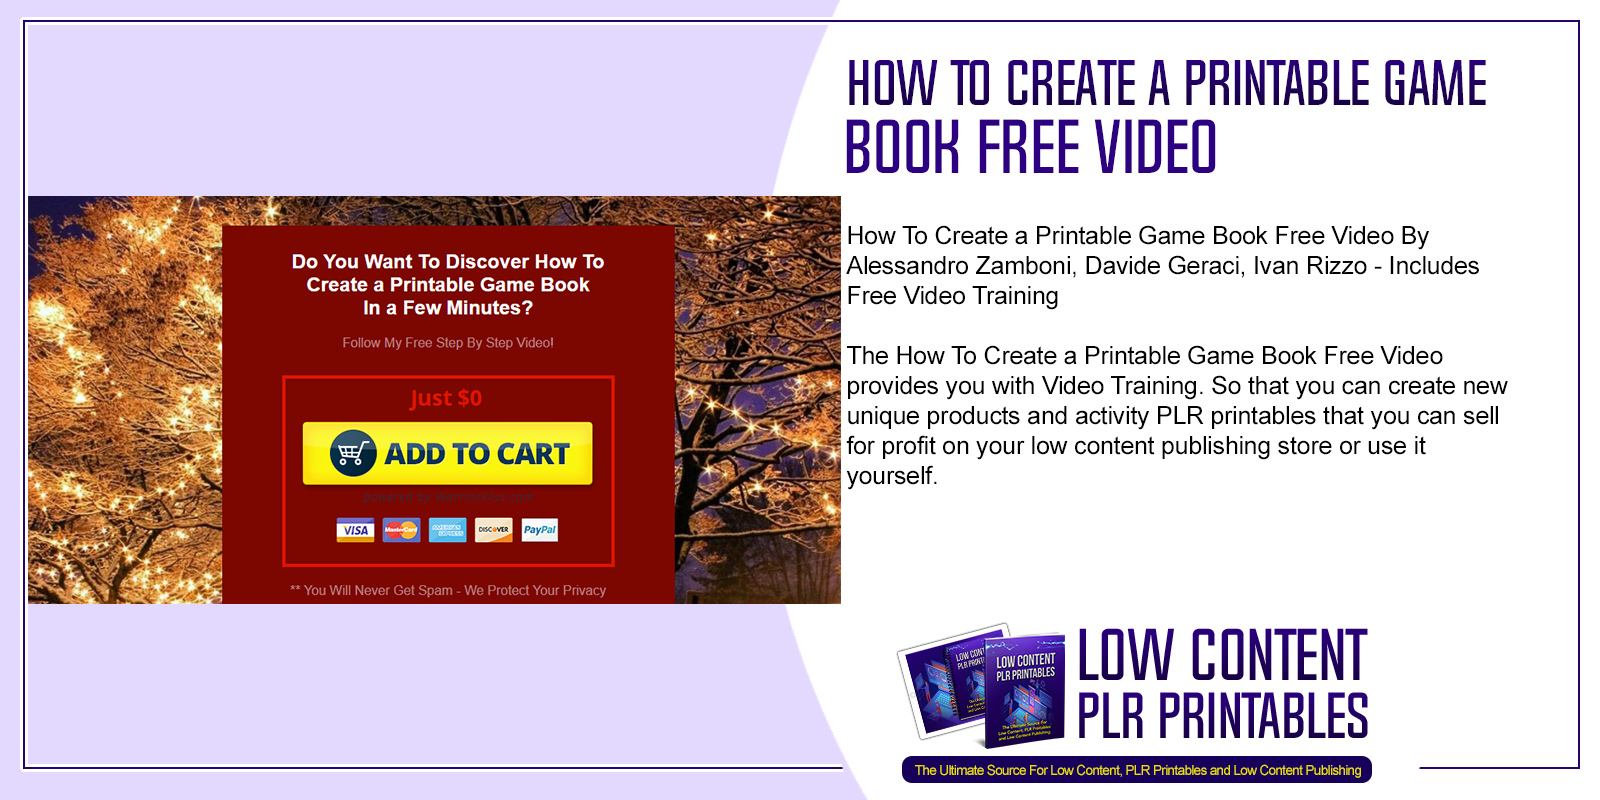 How To Create a Printable Game Book Free Video